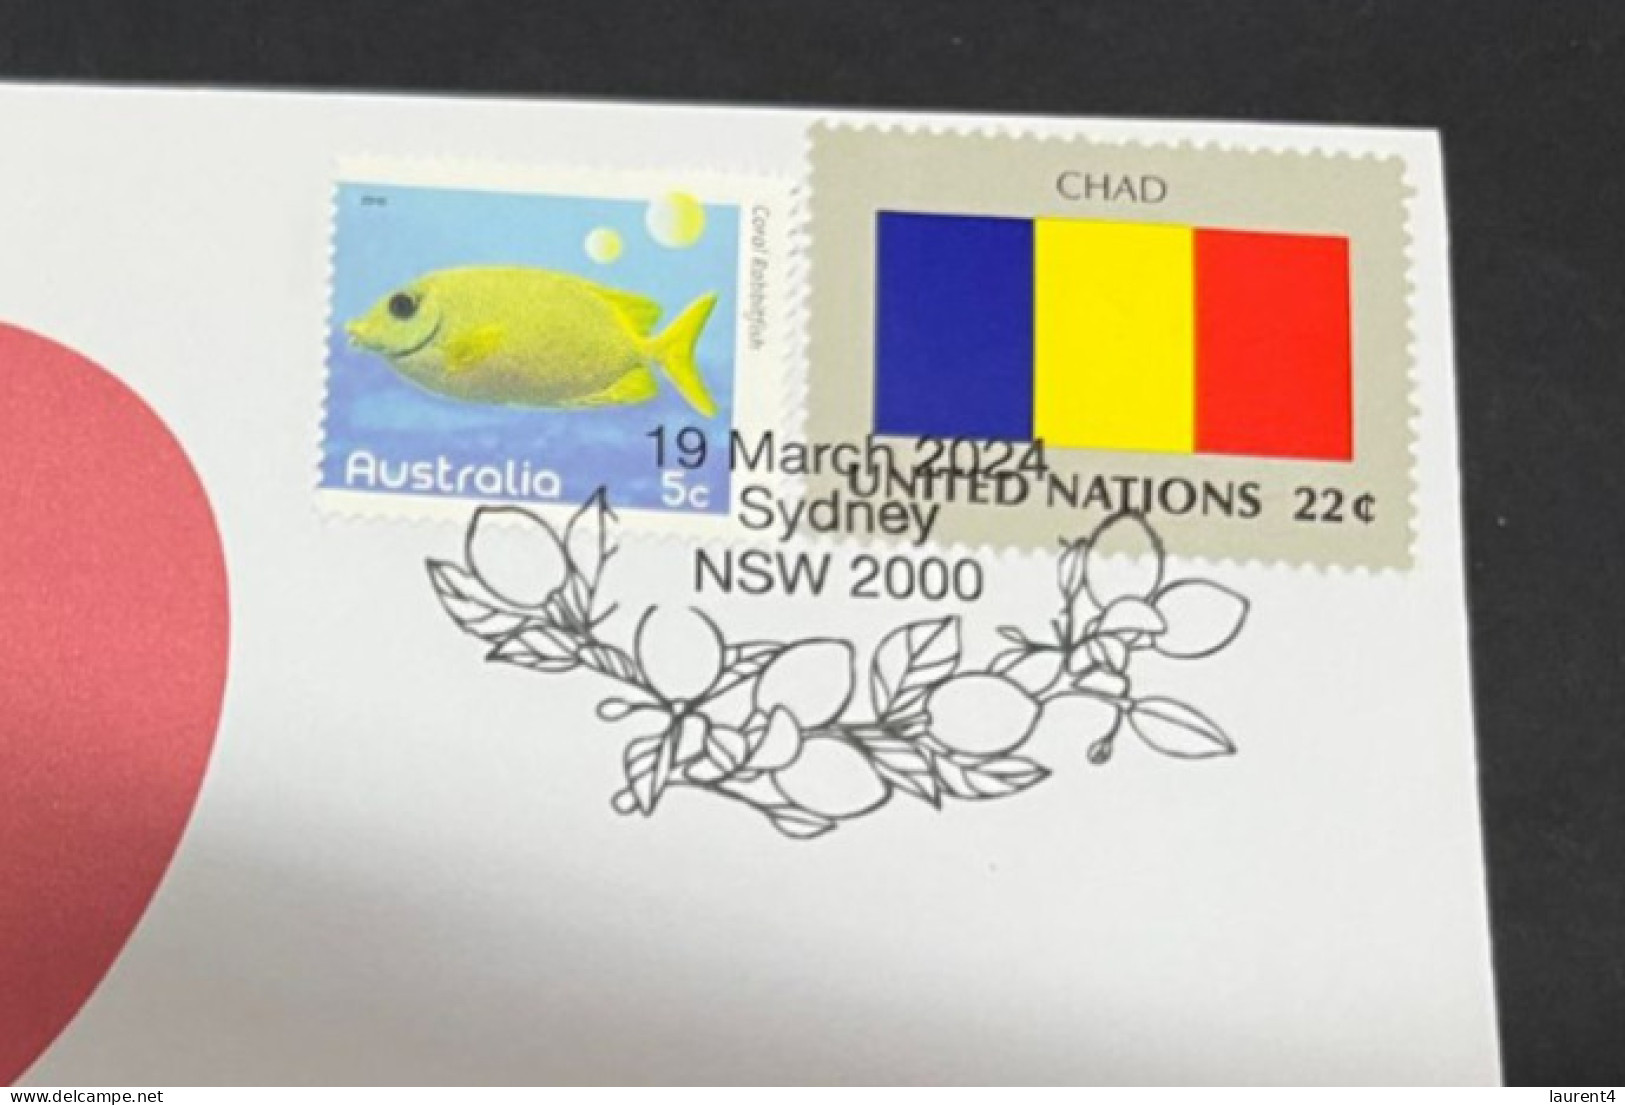 19-3-2024 (3 Y 28) COVID-19 4th Anniversary - Chad - 19 March 2024 (with Chad UN Flag Stamp) - Ziekte